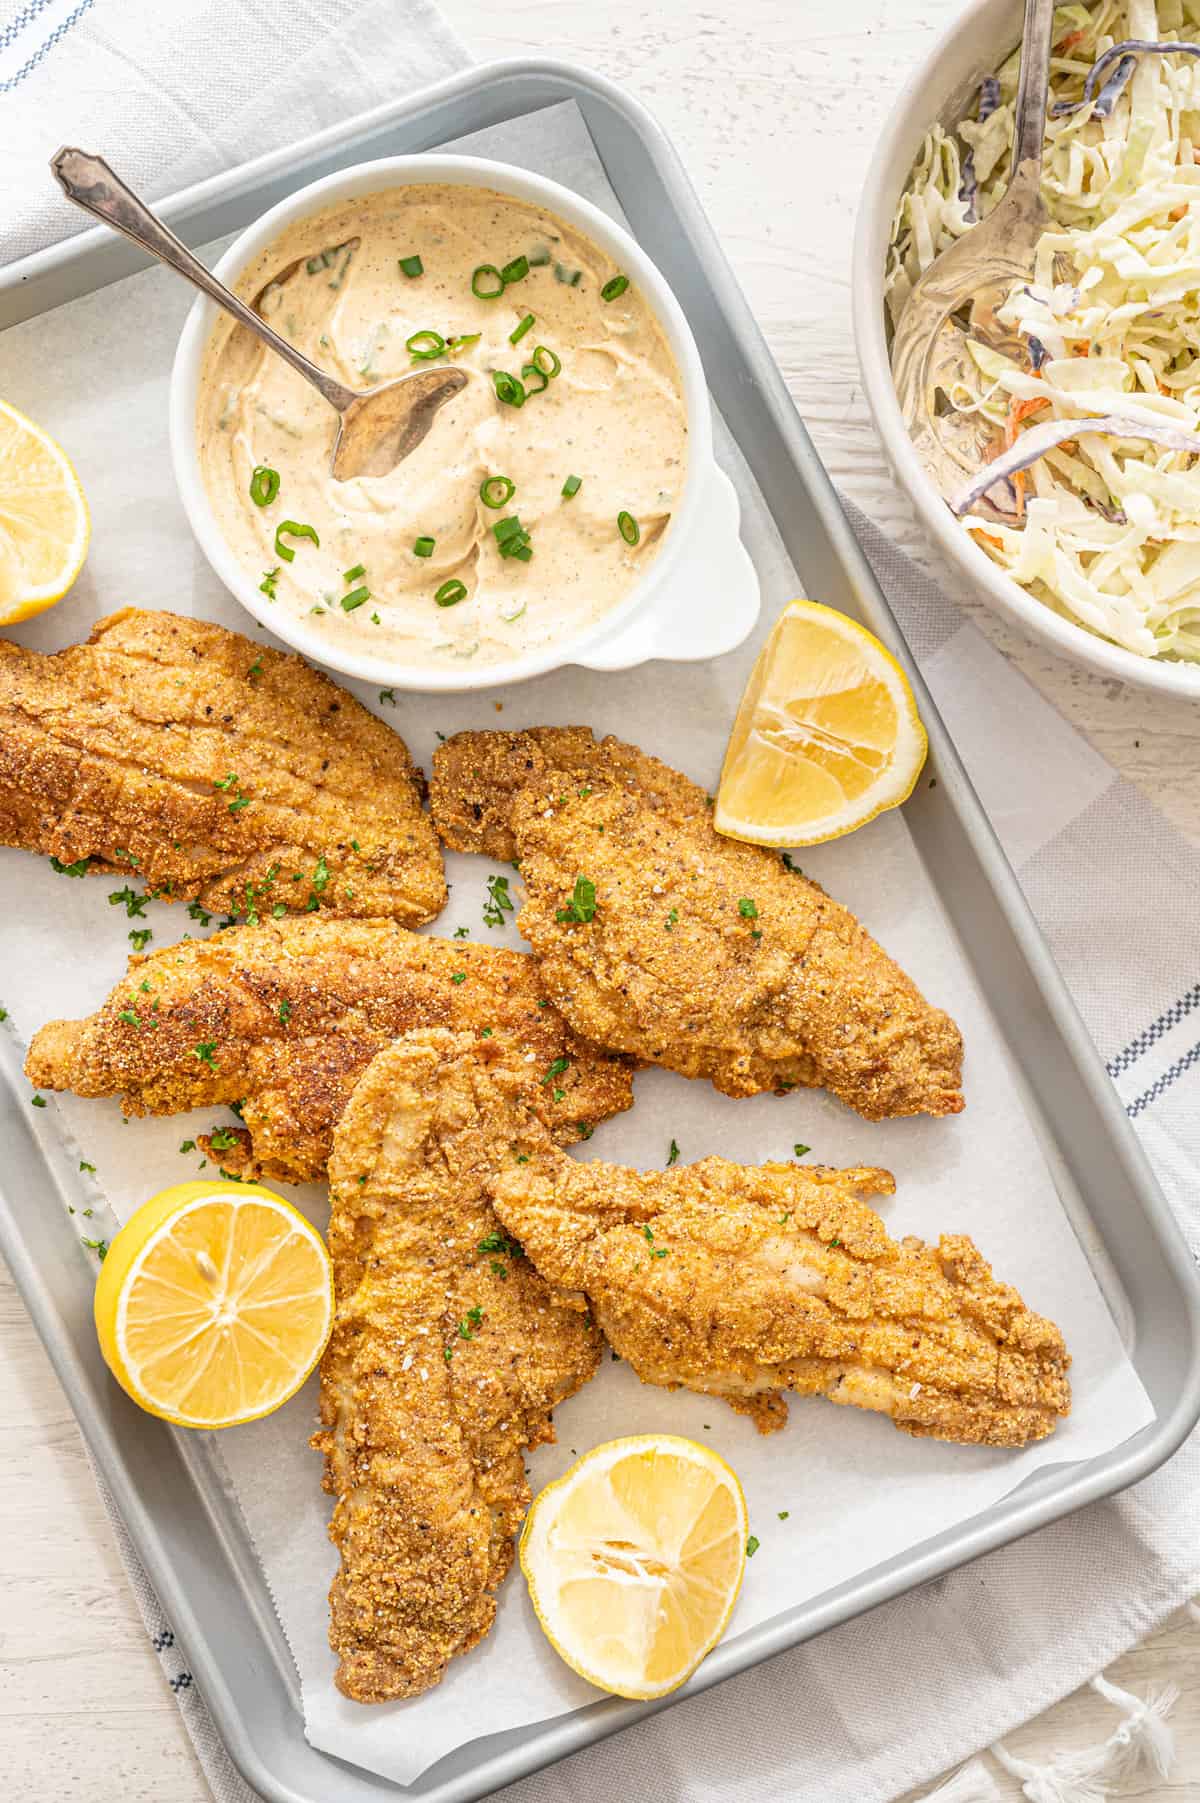 How to Reheat Fried Fish So It's Perfectly Crispy